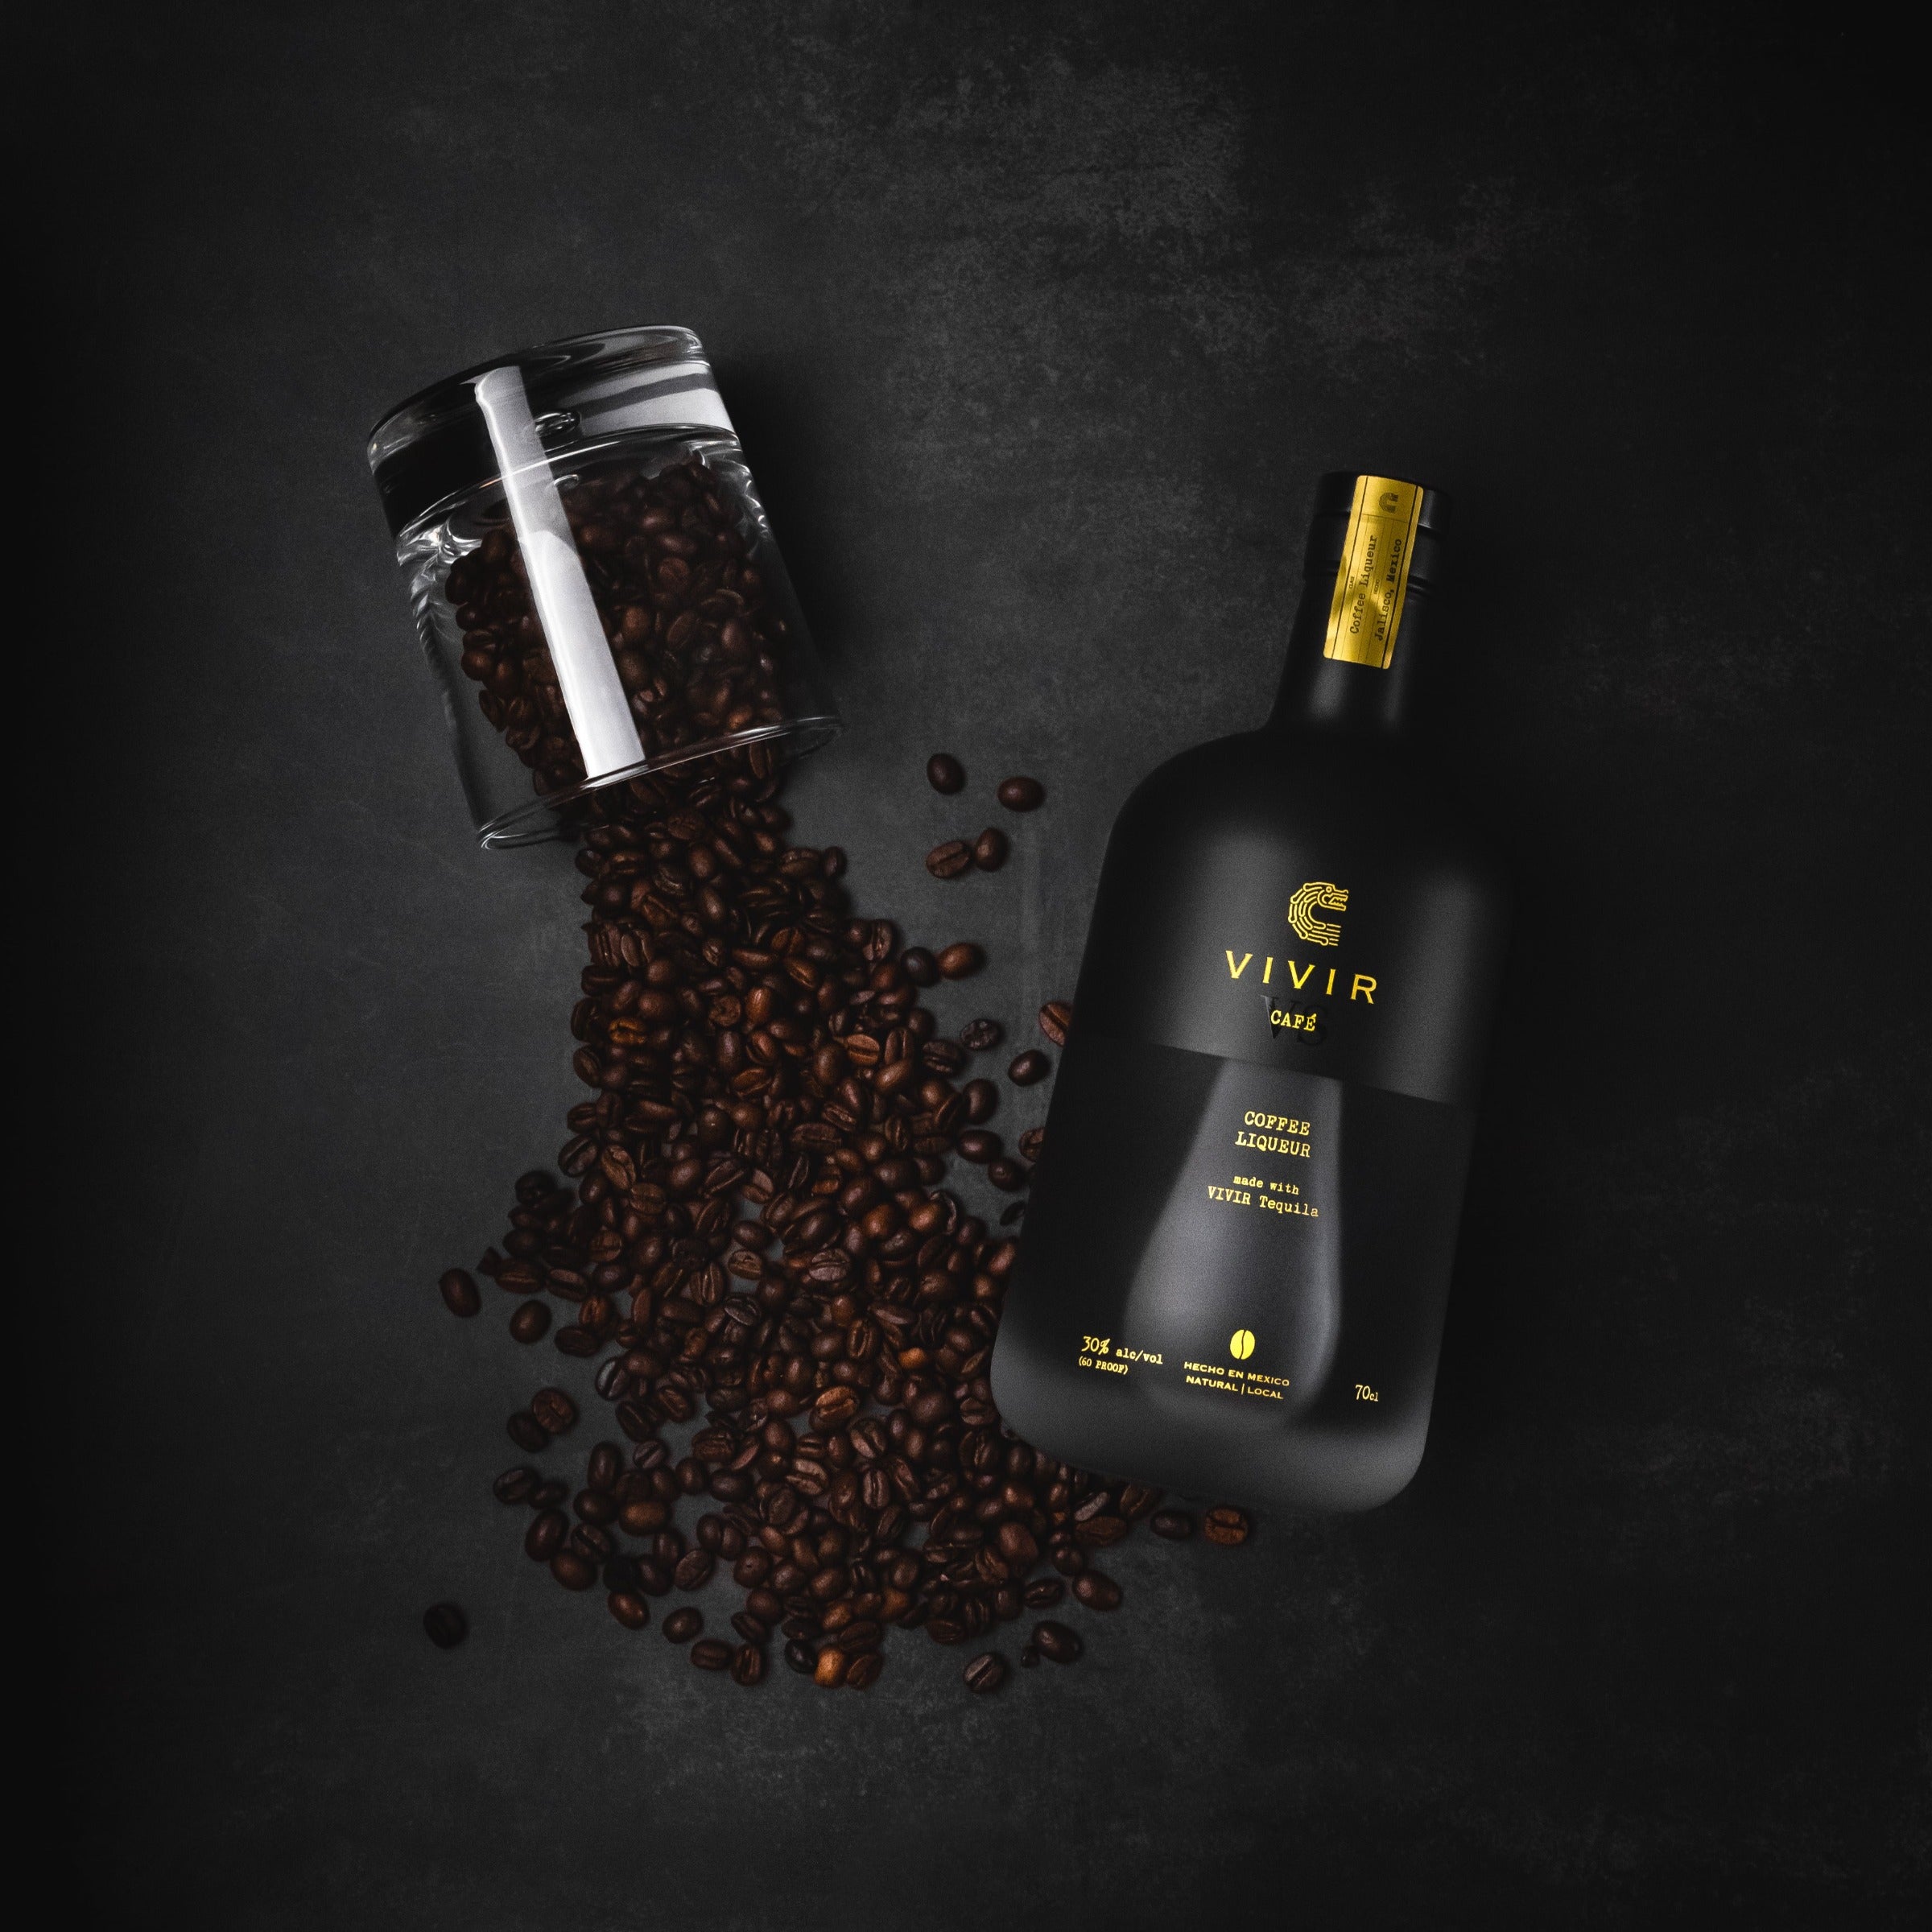 A bottle of VIVIR Café VS is positioned next to a glass of spilt coffee beans.